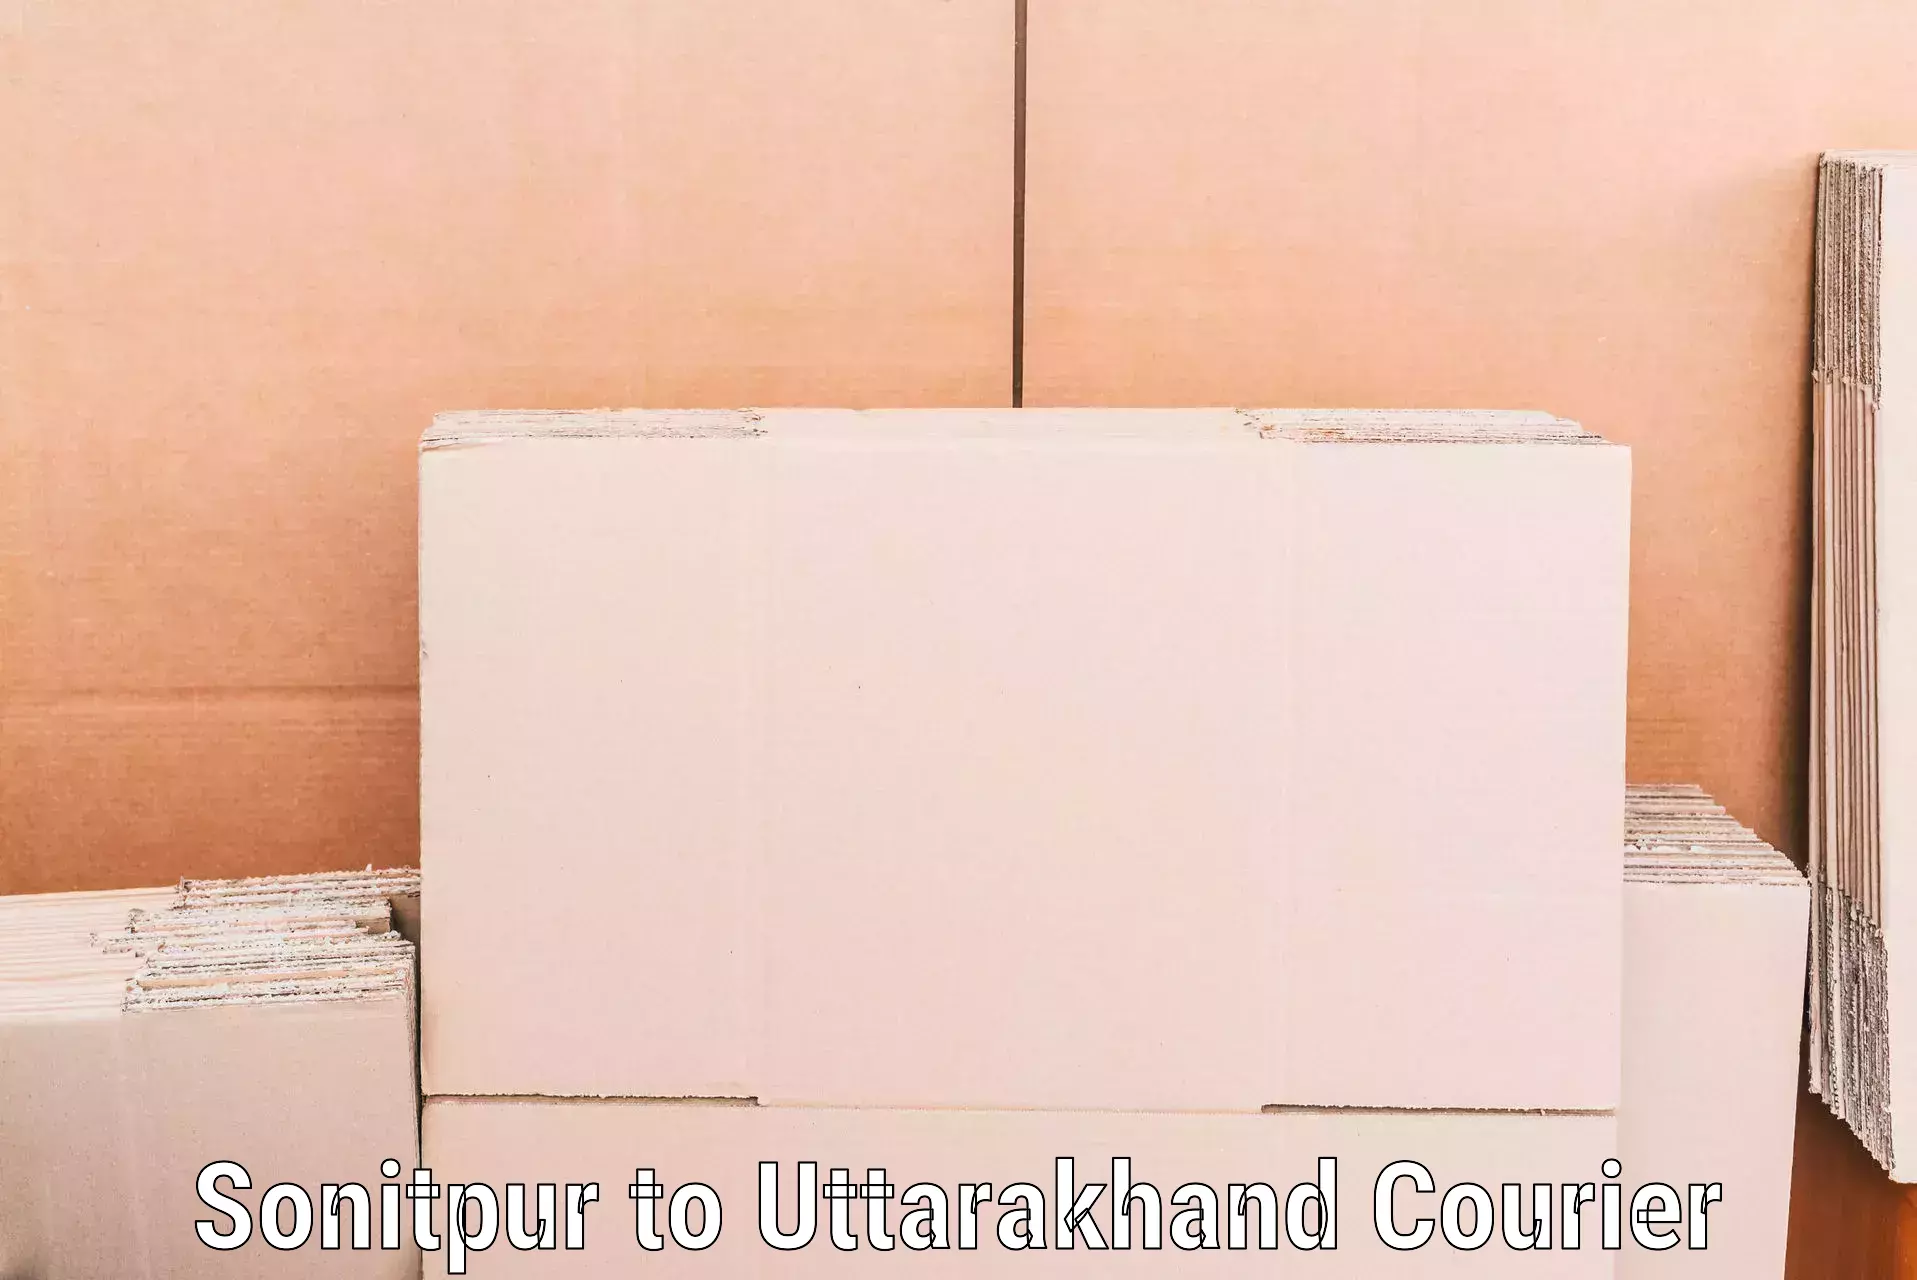 Furniture delivery service Sonitpur to IIT Roorkee